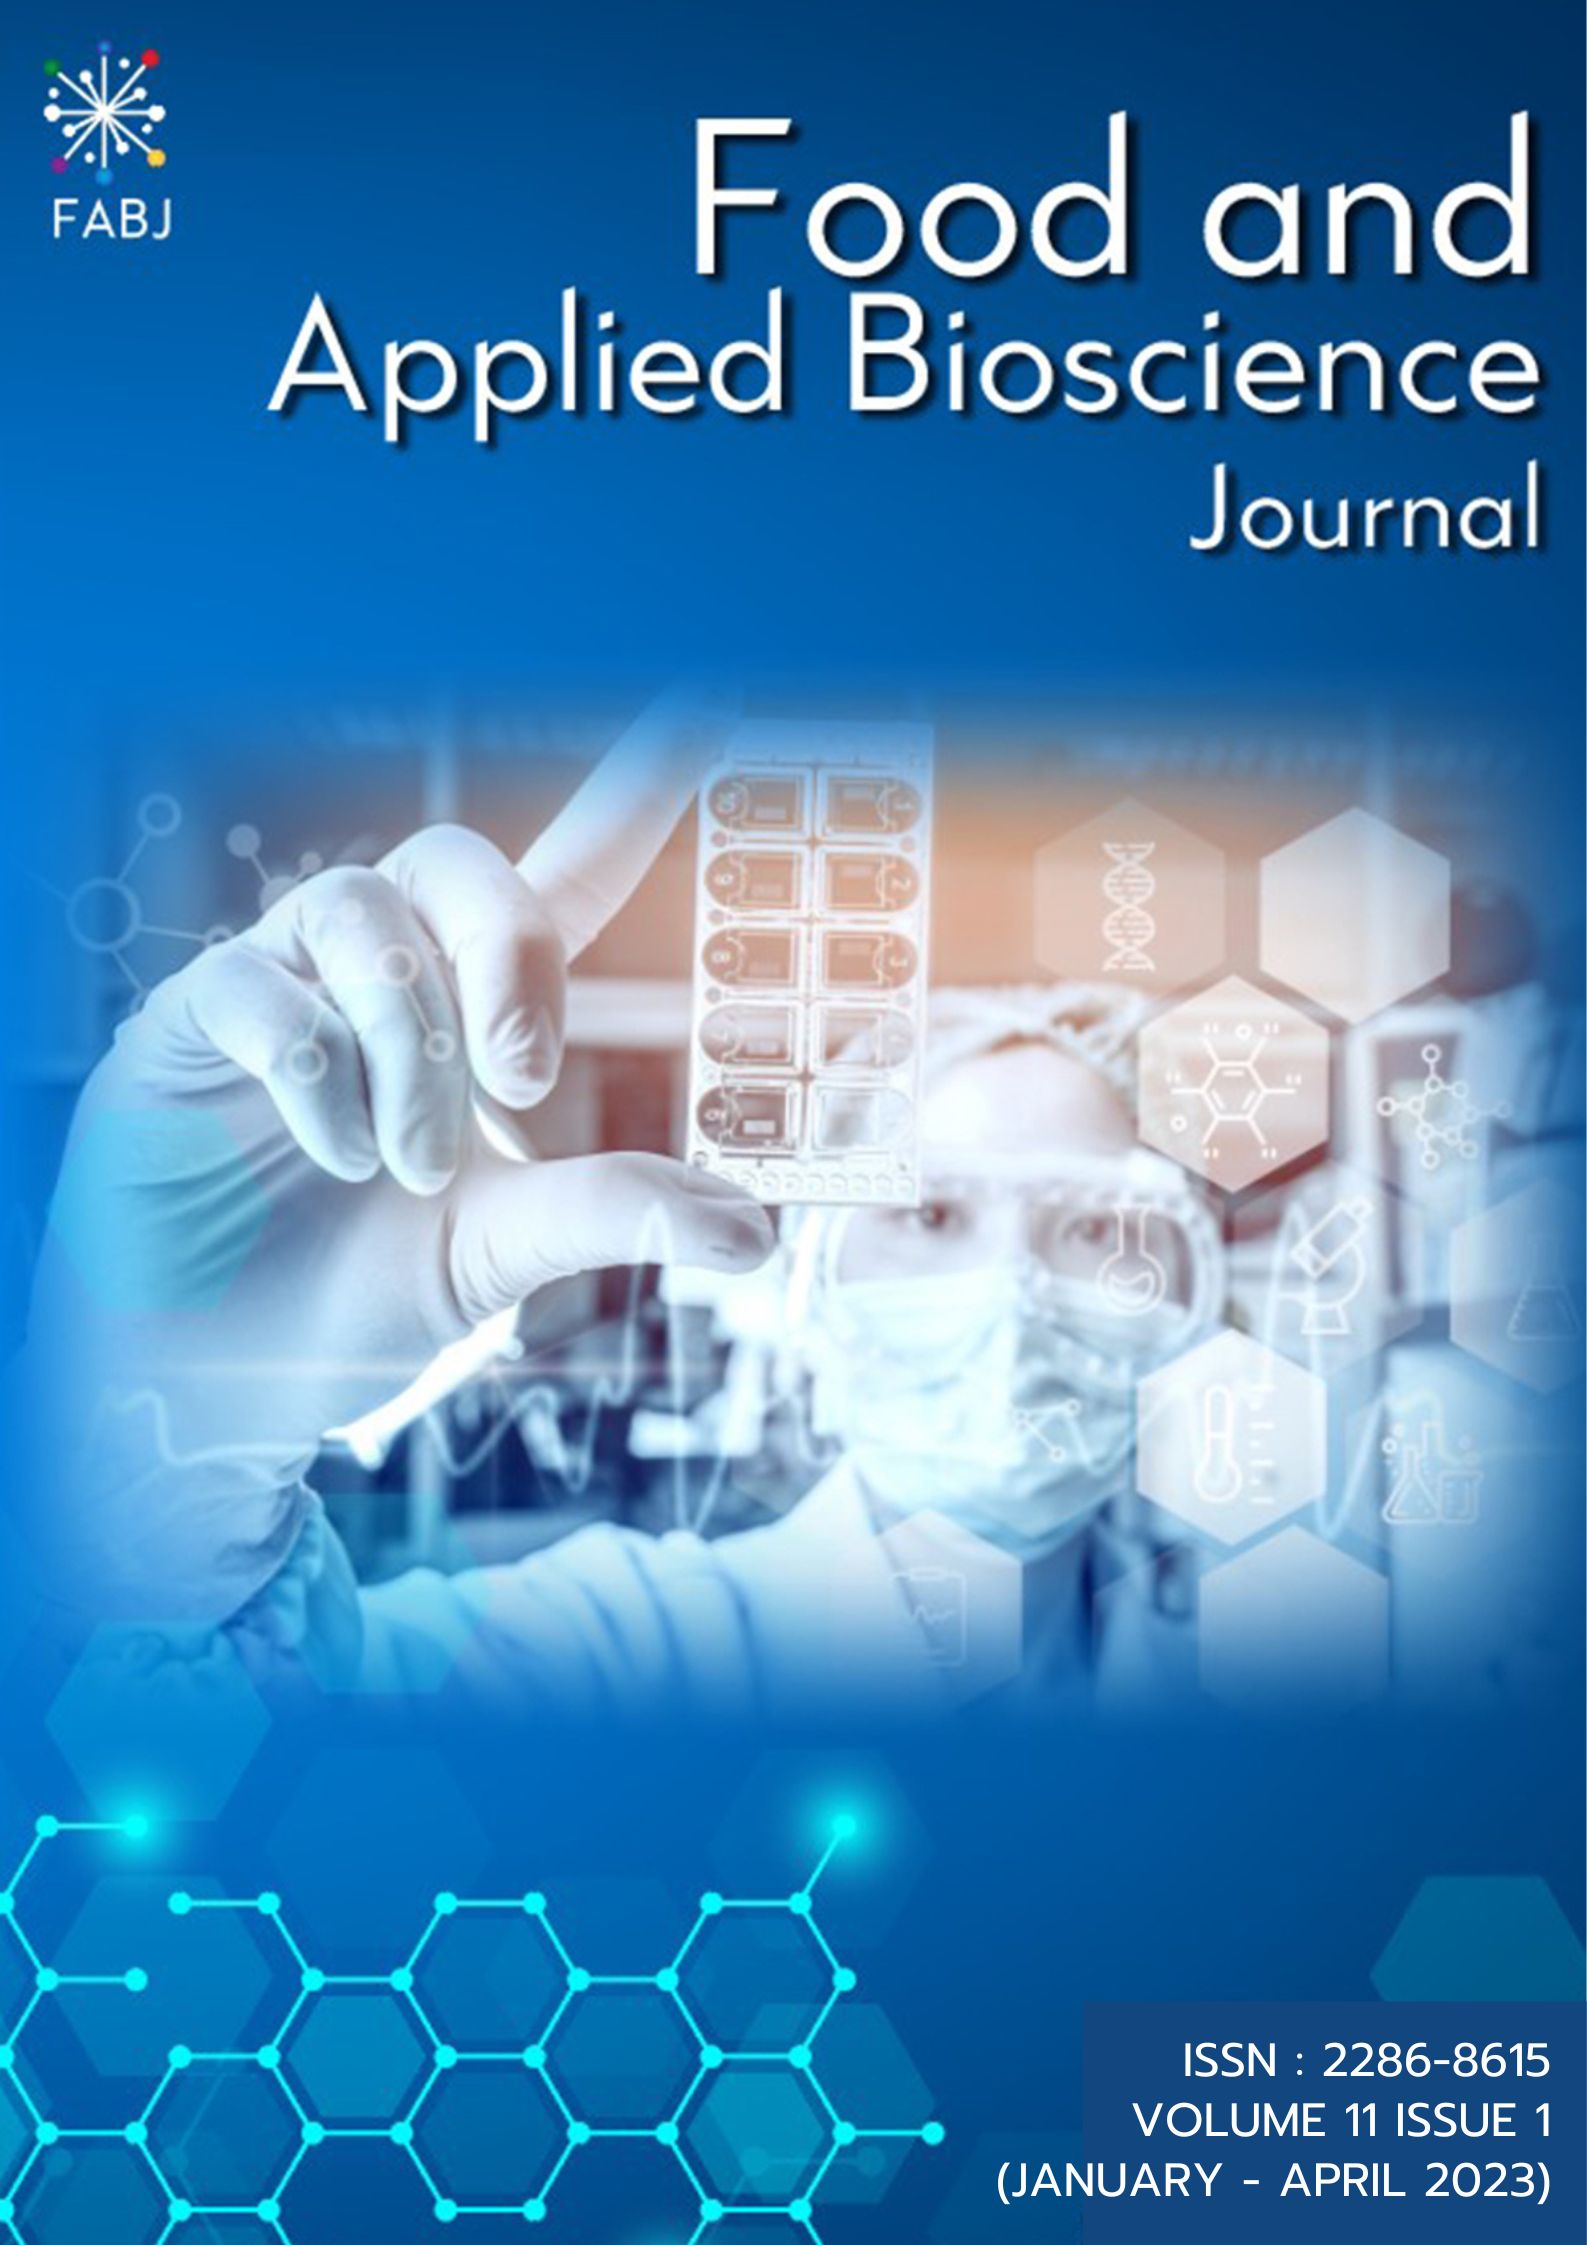 					View Vol. 11 No. 1 (2023): Food and Applied Bioscience Journal (January - April 2023)
				